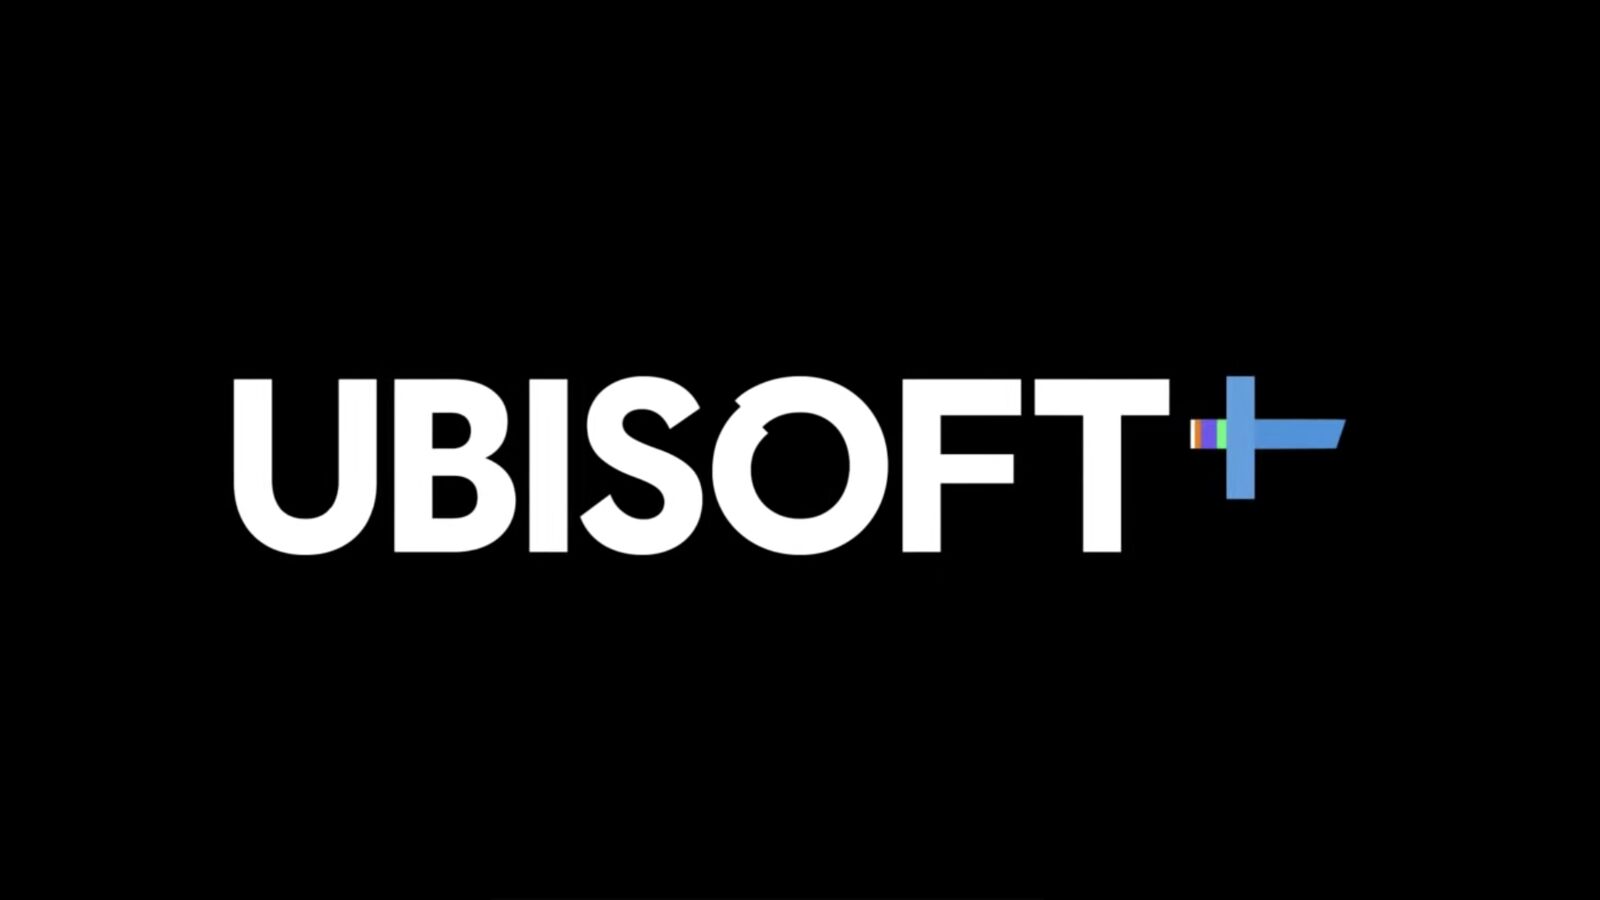 Ubisoft+ is free to try for 30 days